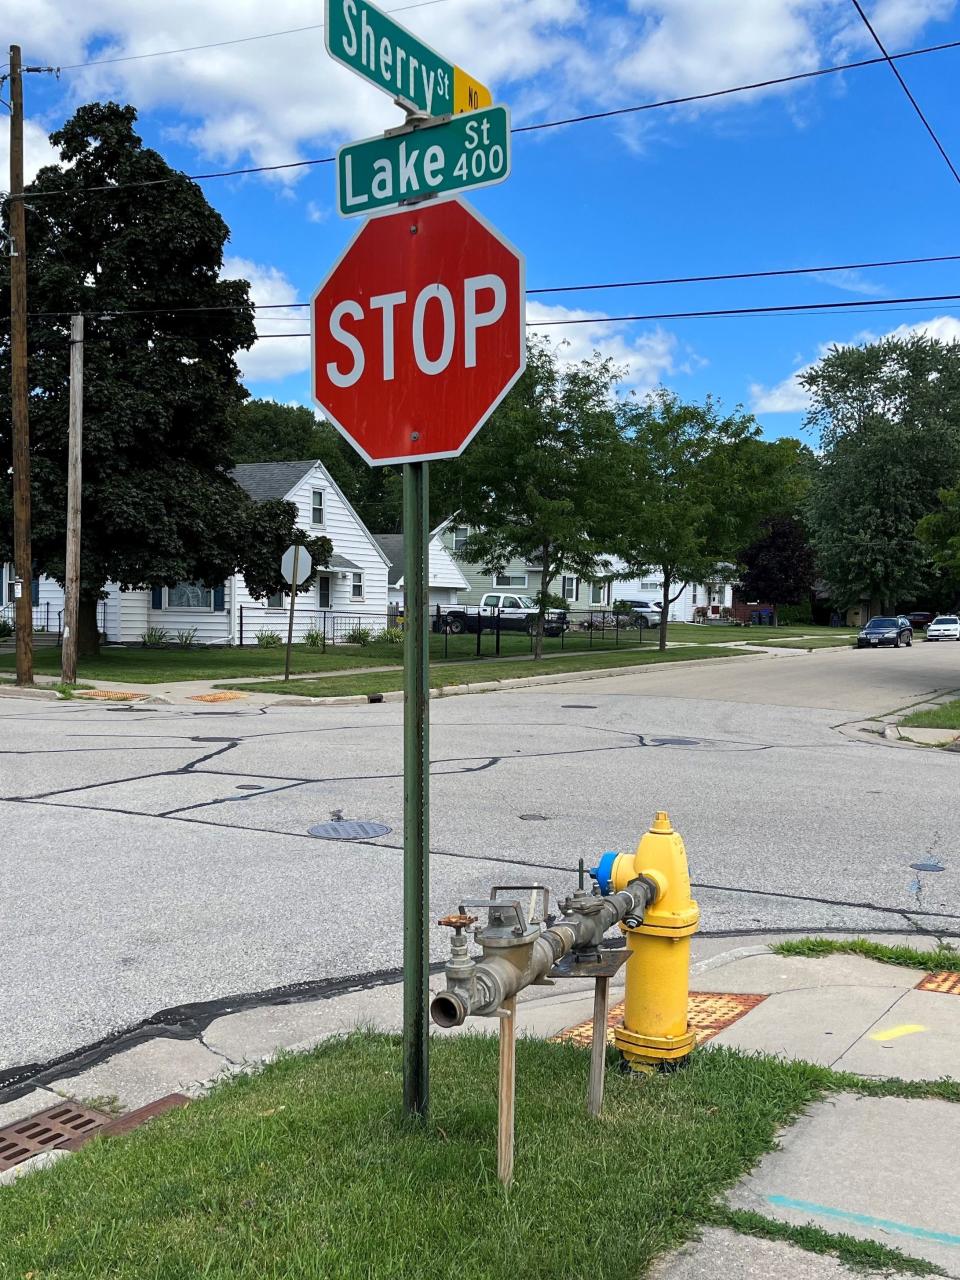 A hydrant meter at the intersection of Lake and Sherry streets in Neenah allows contractors in need of water to avoid frequent trips to the filling stations at the Neenah water plant.